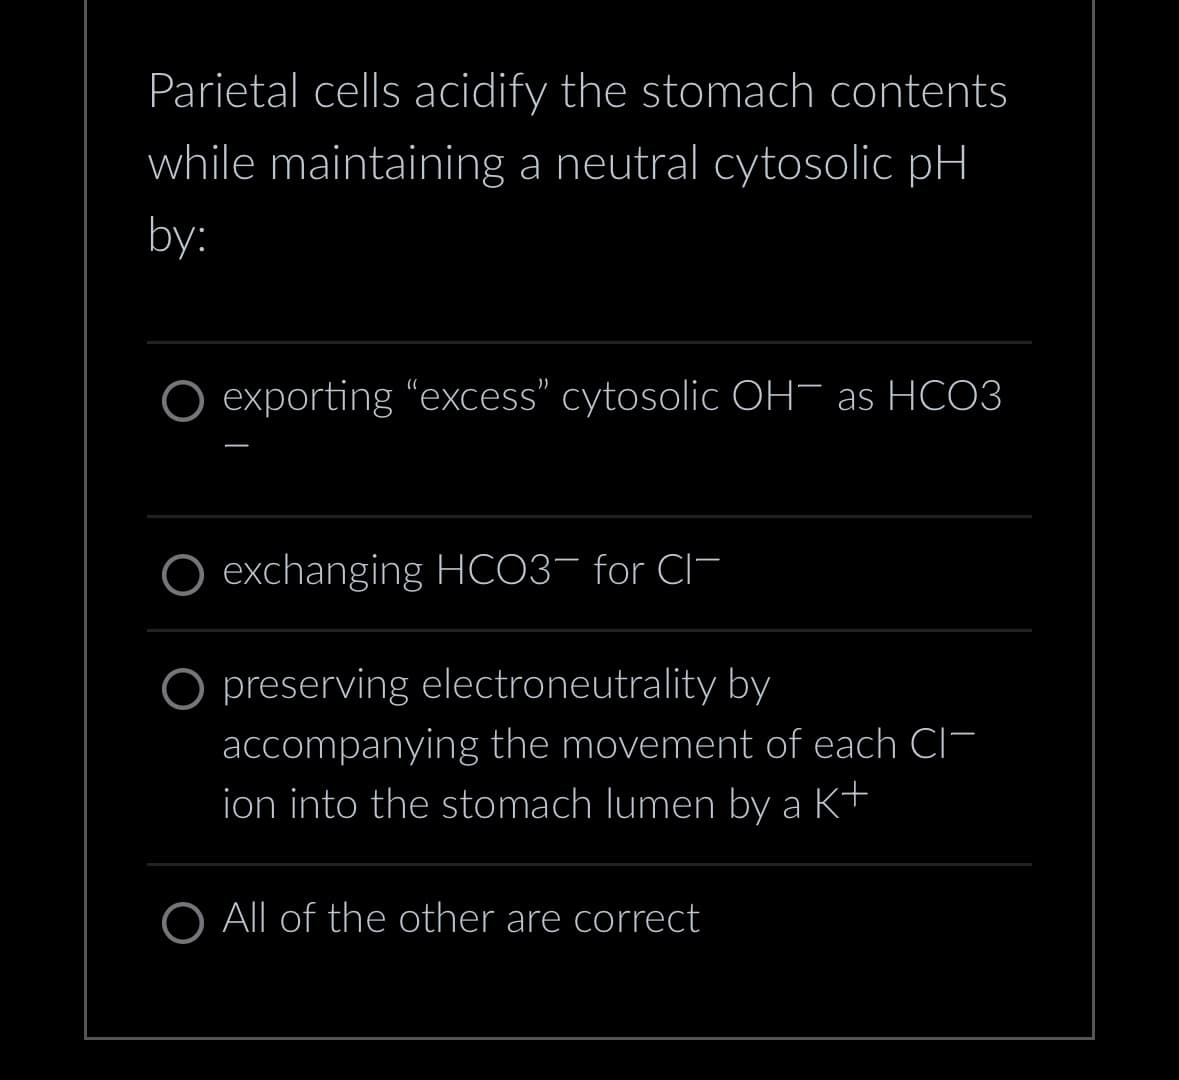 Parietal cells acidify the stomach contents
while maintaining a neutral cytosolic pH
by:
exporting "excess" cytosolic OH as HCO3
exchanging HCO3- for CI
O preserving electroneutrality by
accompanying the movement of each CI
ion into the stomach lumen by a K+
O All of the other are correct